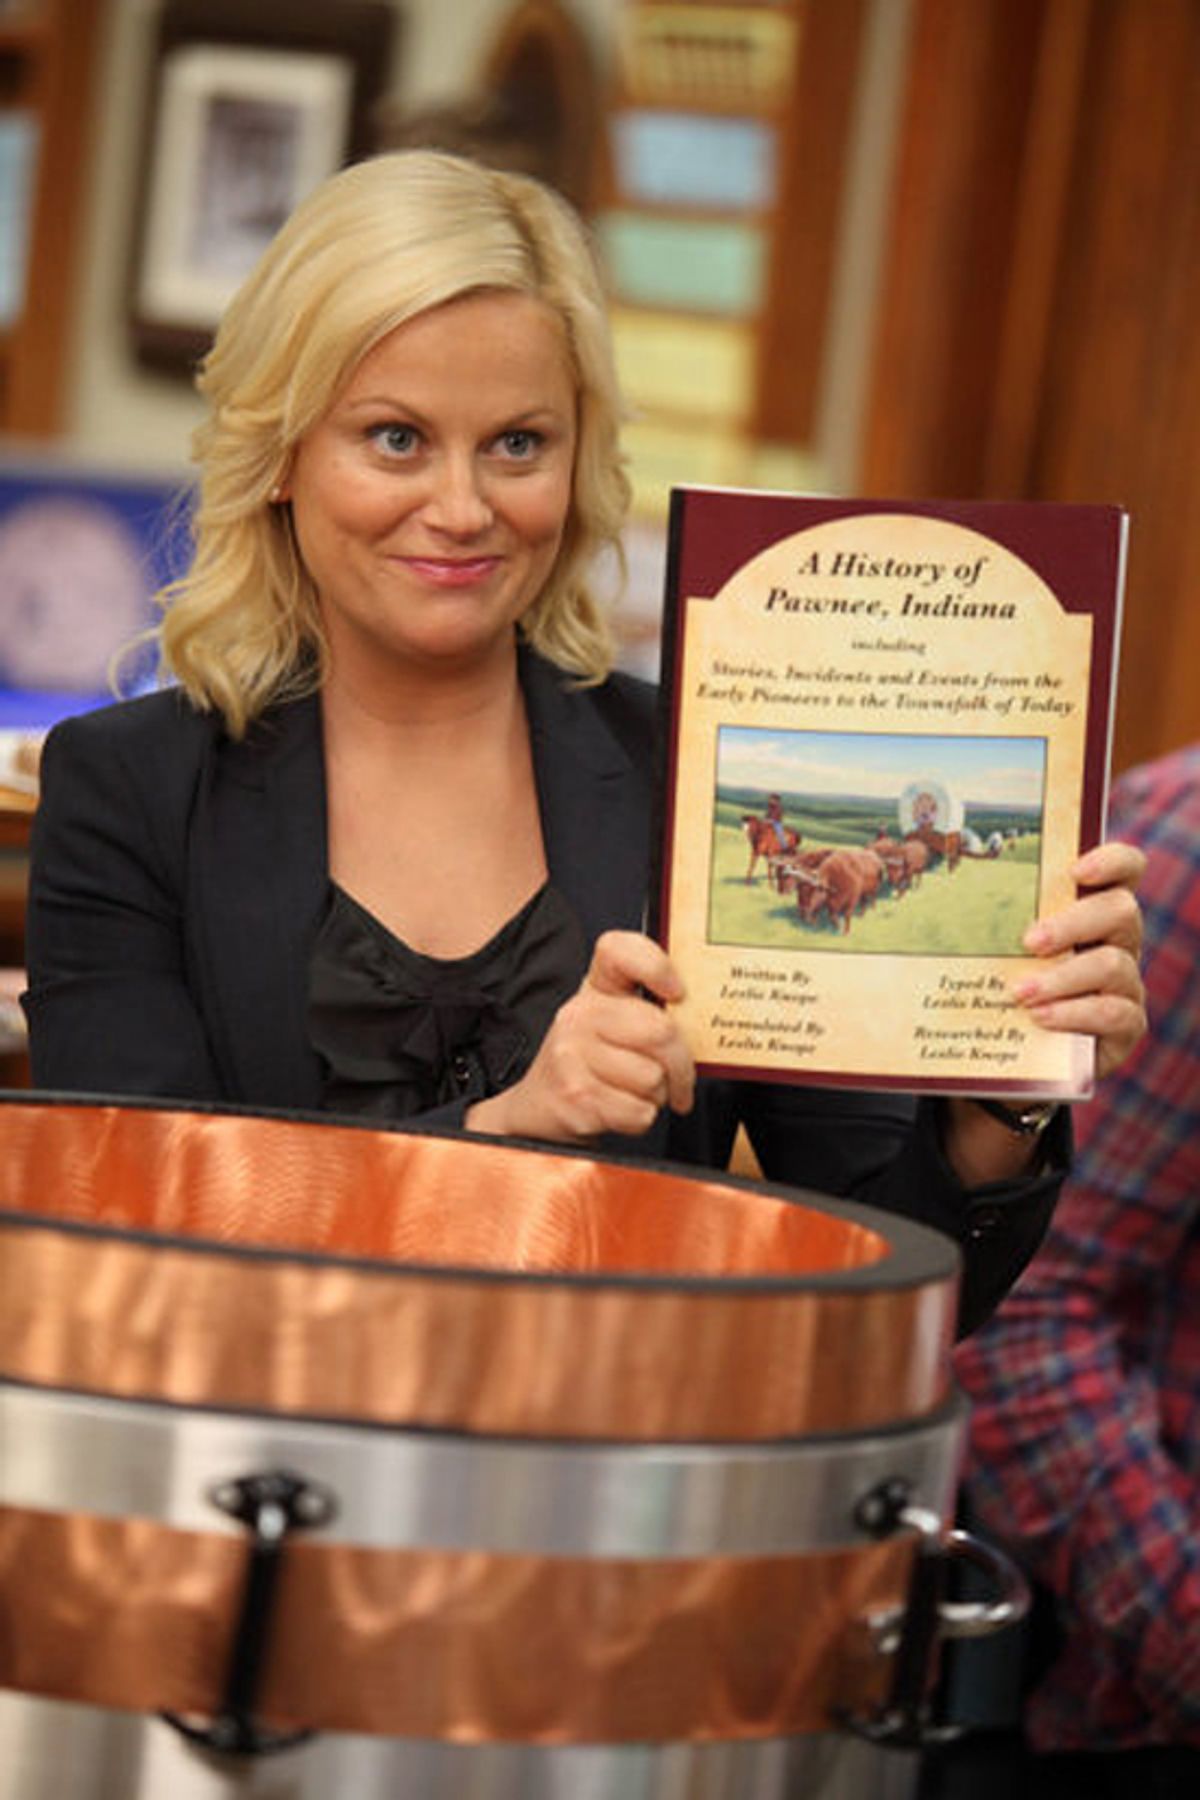 PARKS AND RECREATION -- "Time Capsule" Episode 306 -- Pictured: Amy Poehler as Leslie Knope -- Photo by: Justin Lubin/NBC     (Justin Lubin)